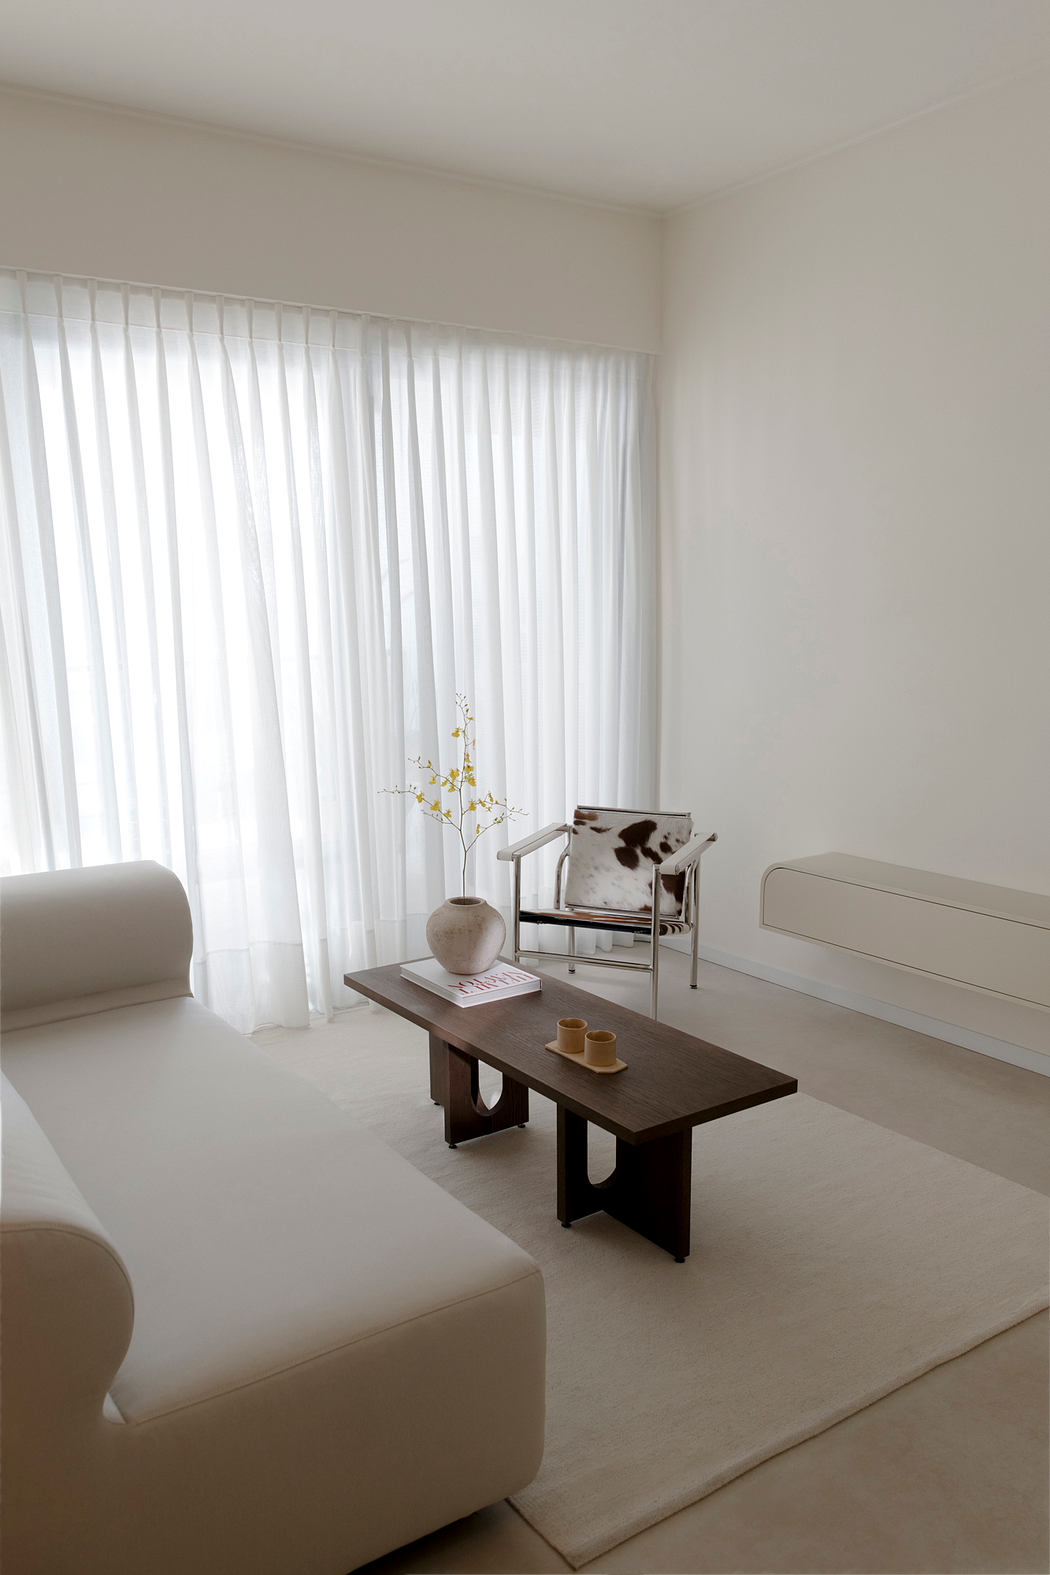 Minimalist living room with white curtains, wooden coffee table, and neutral furnishings.